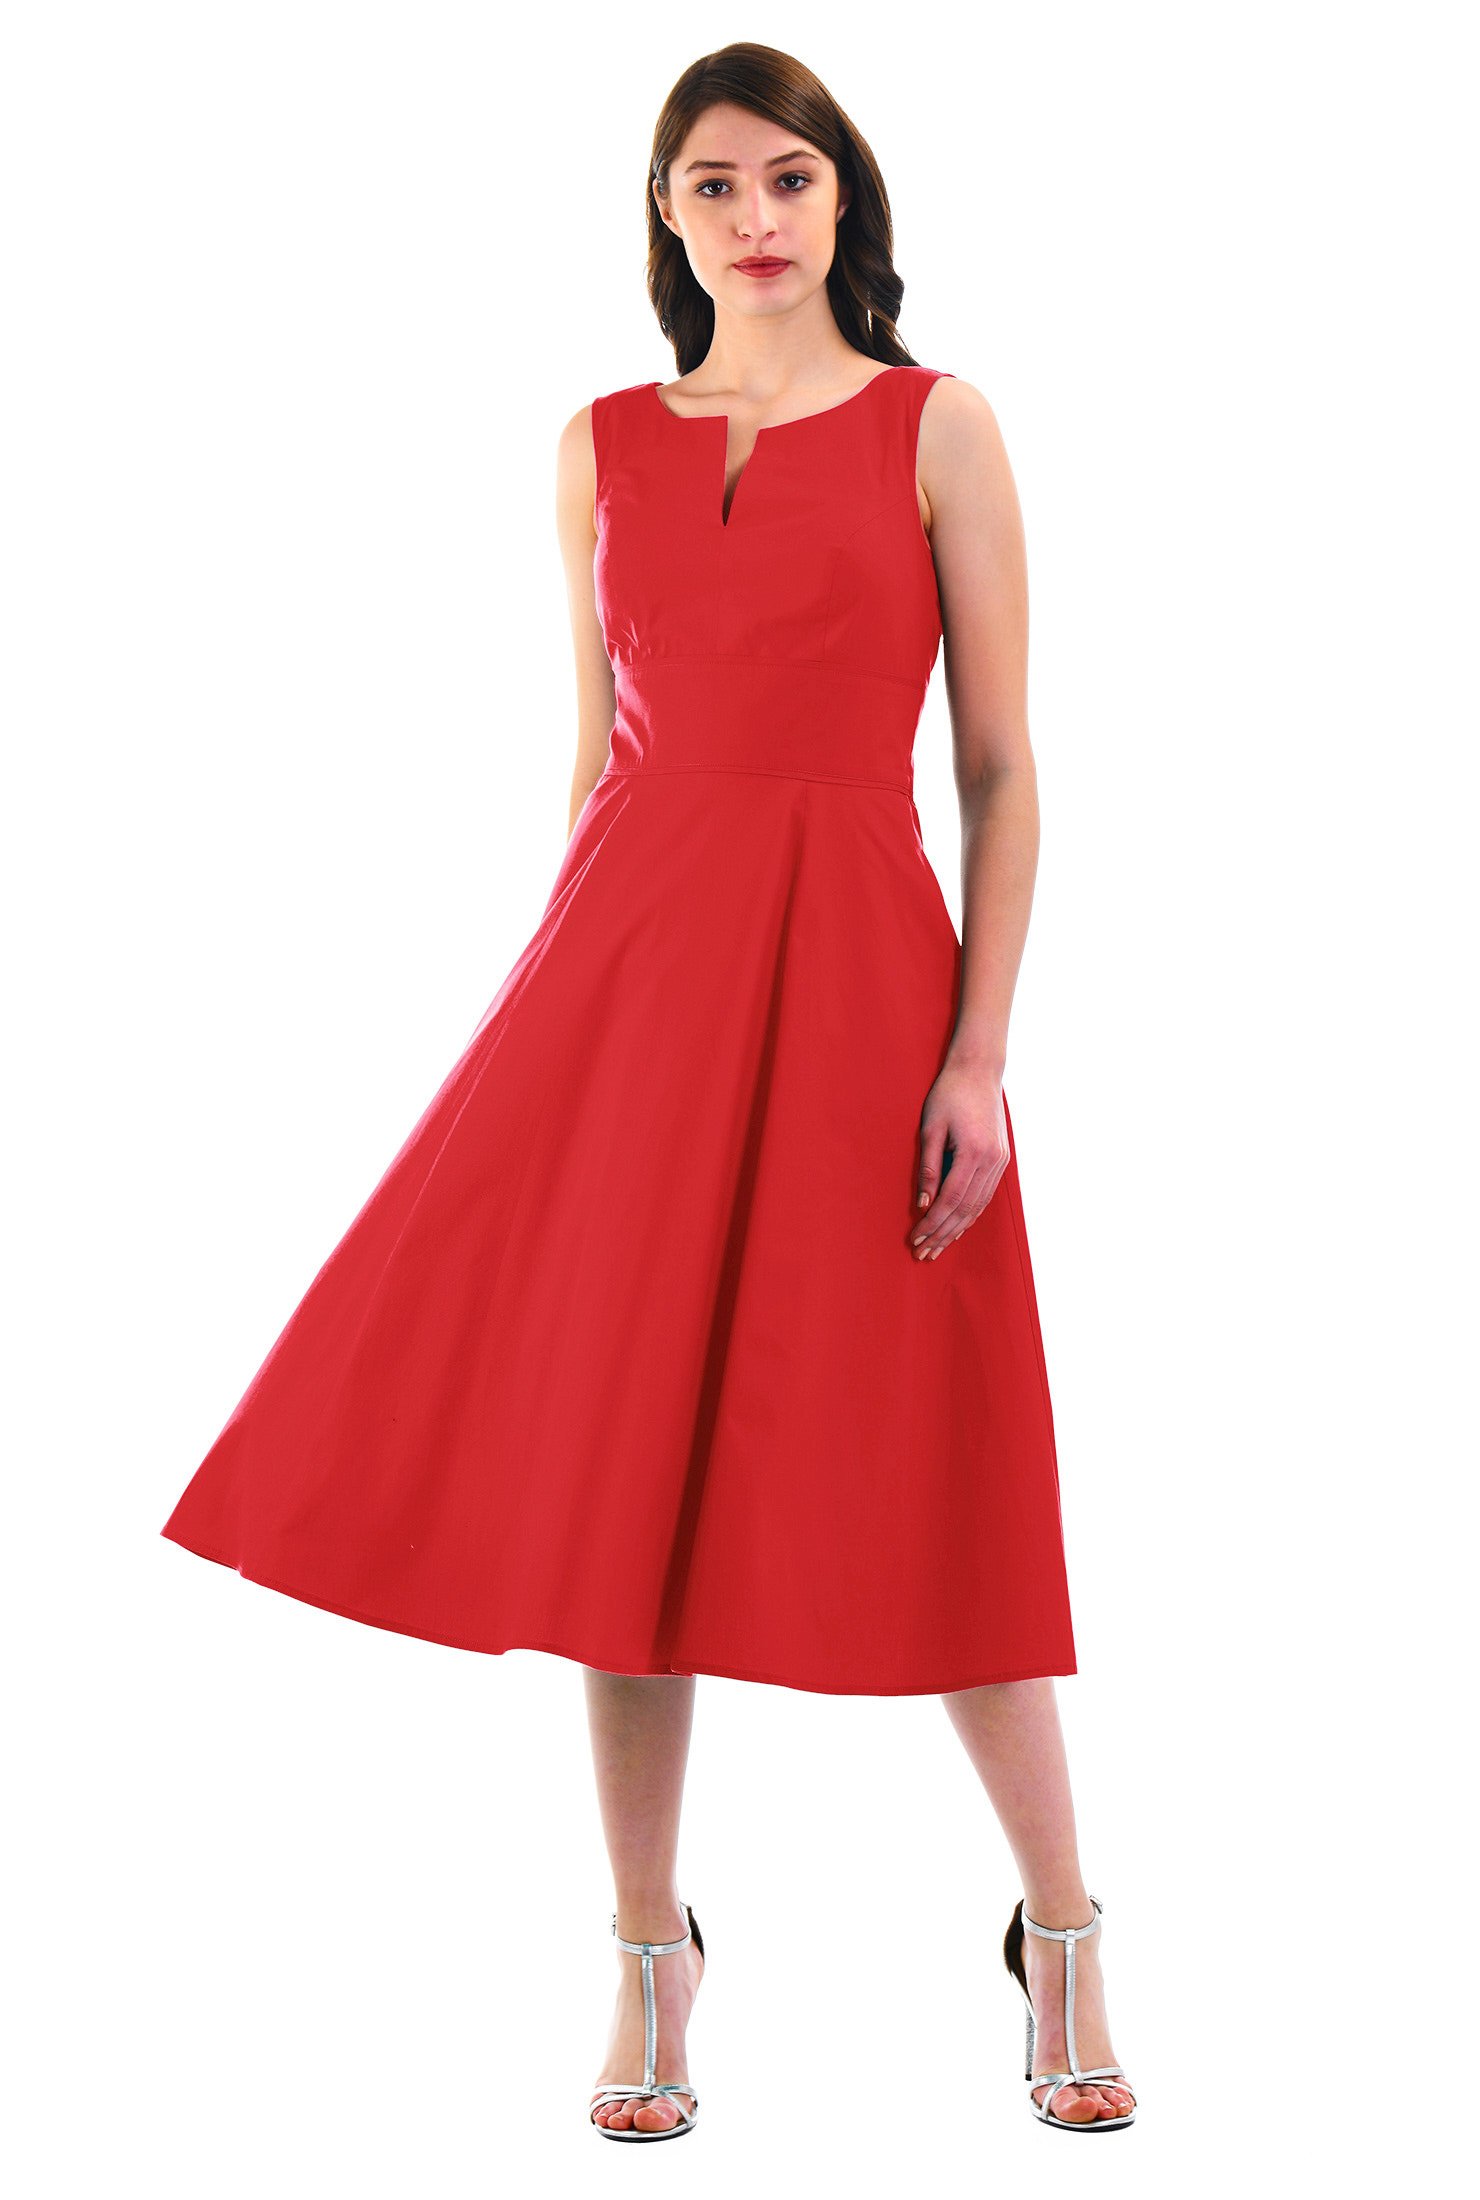 Shop Cotton poplin fit-and-flare dress